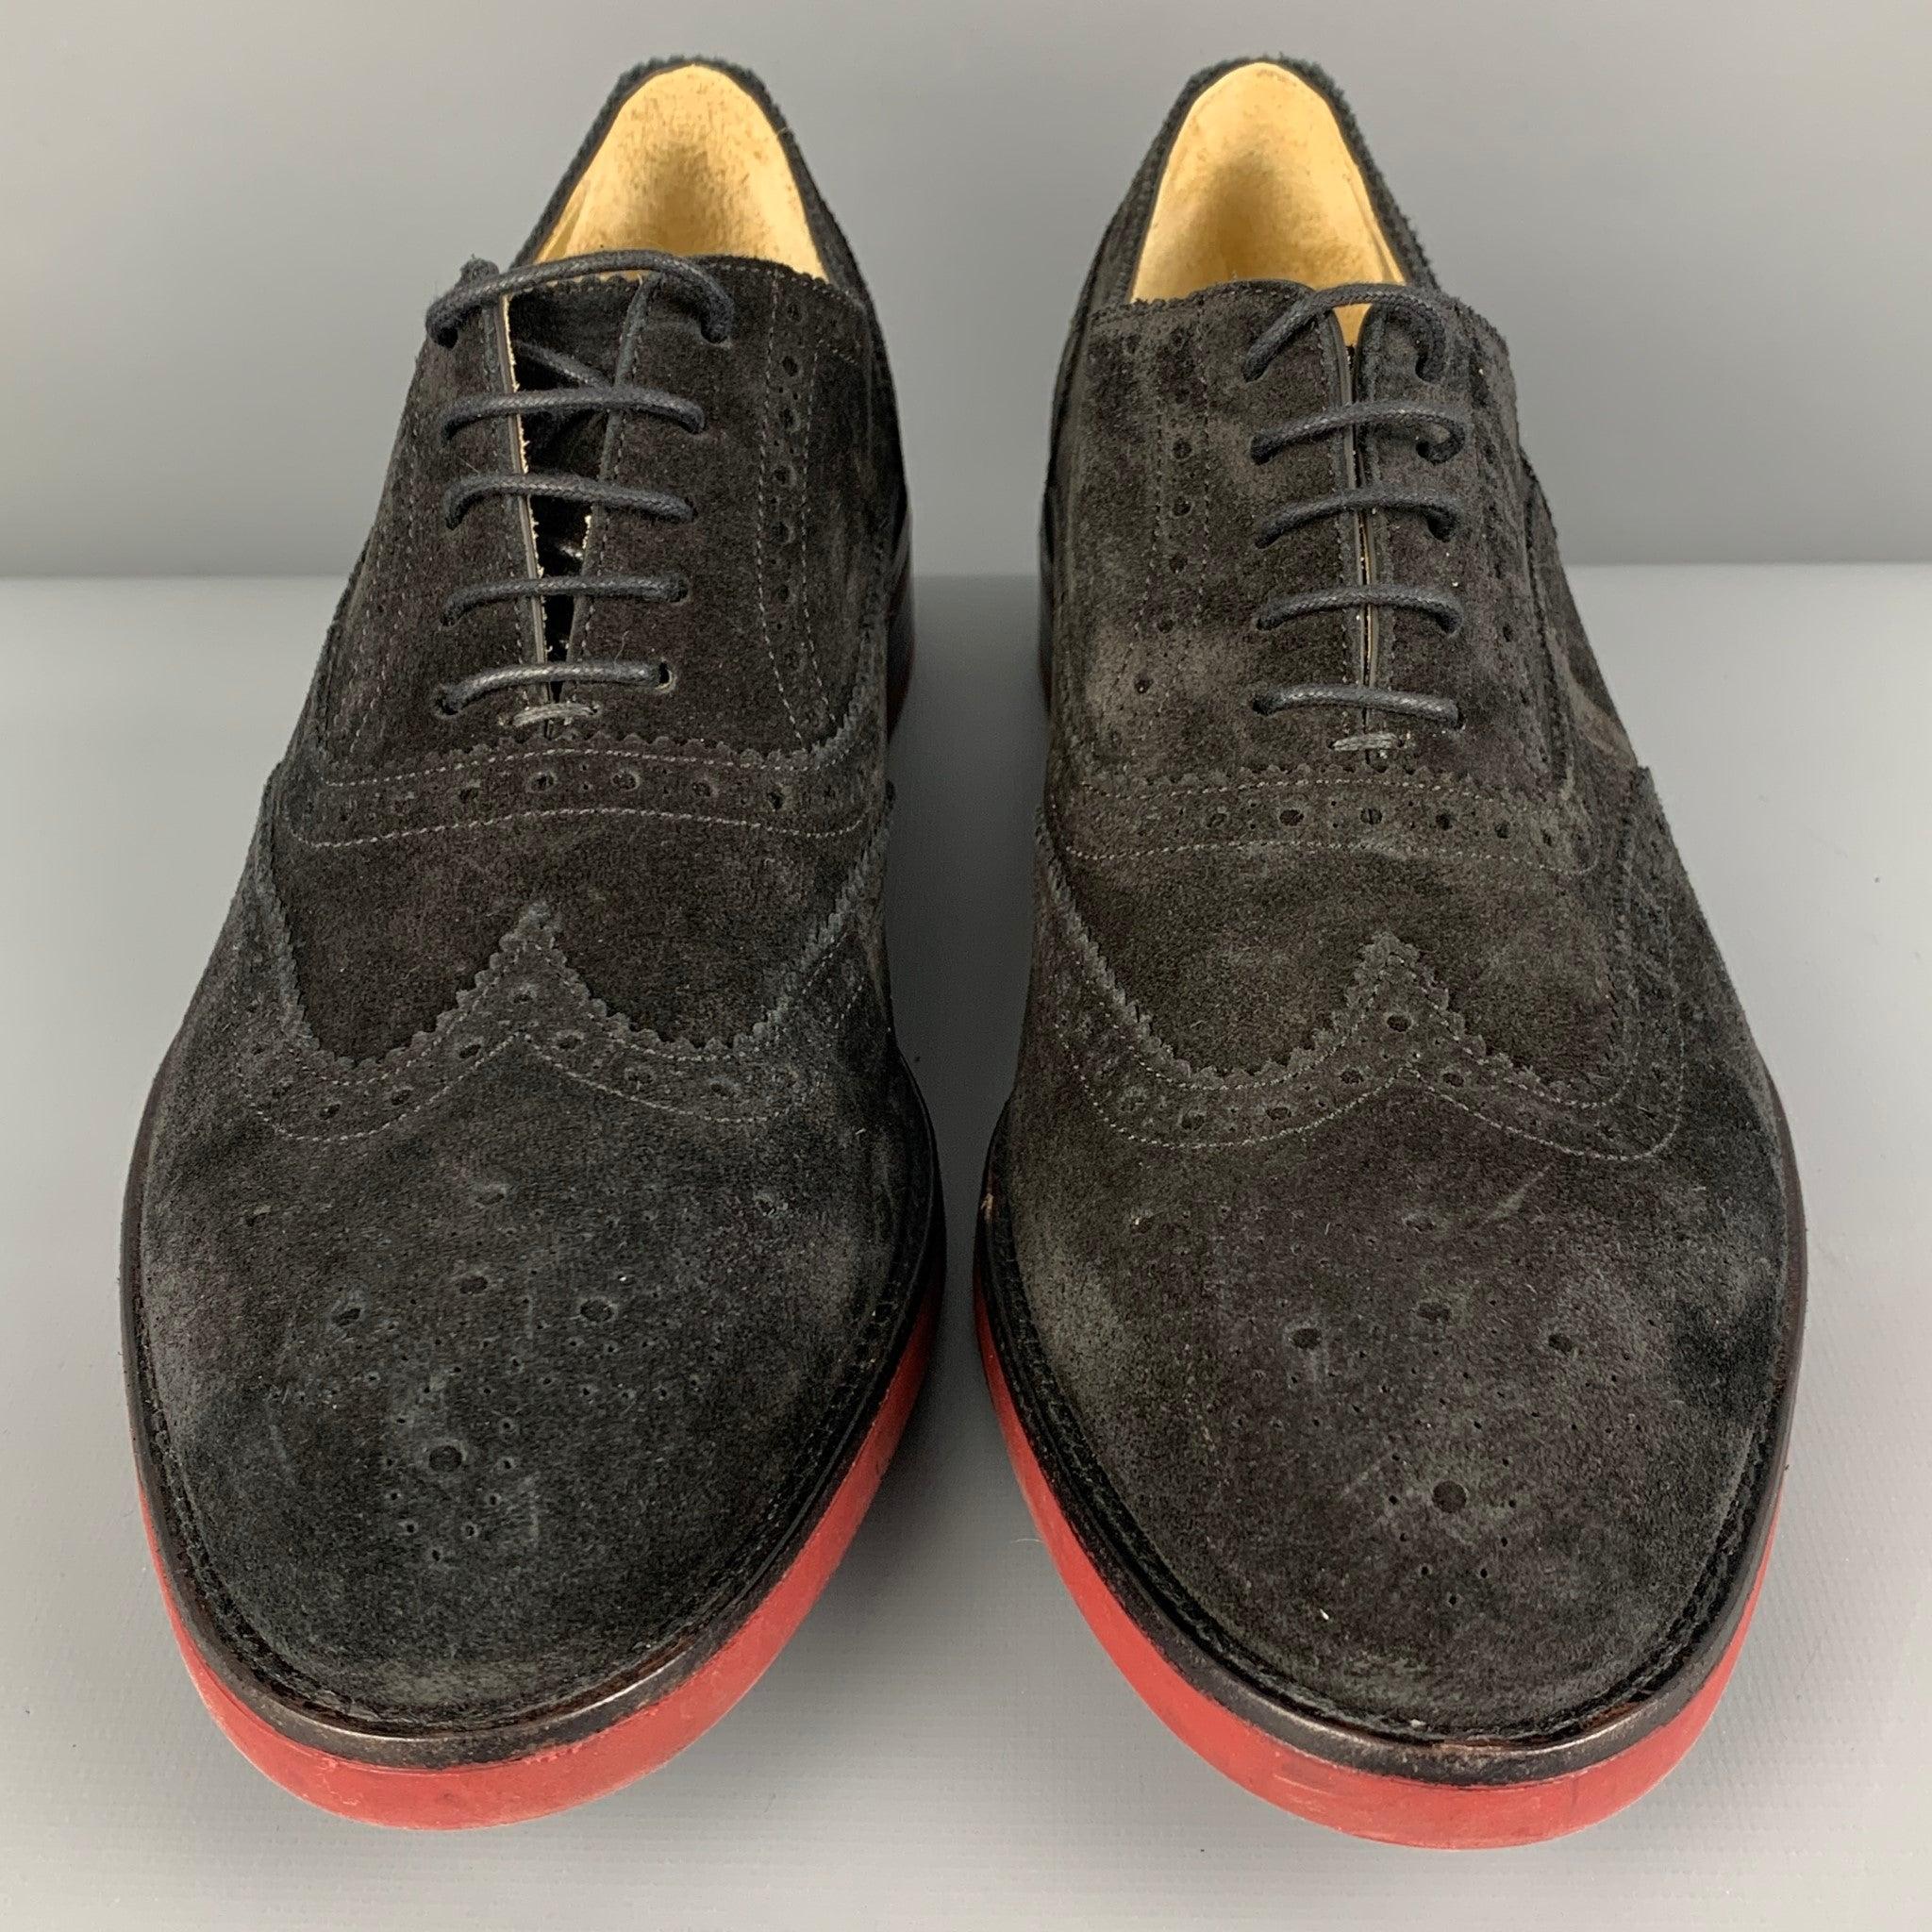 Men's PAUL SMITH Size 10.5 Black Brick Perforated Leather Wingtip Loafers For Sale